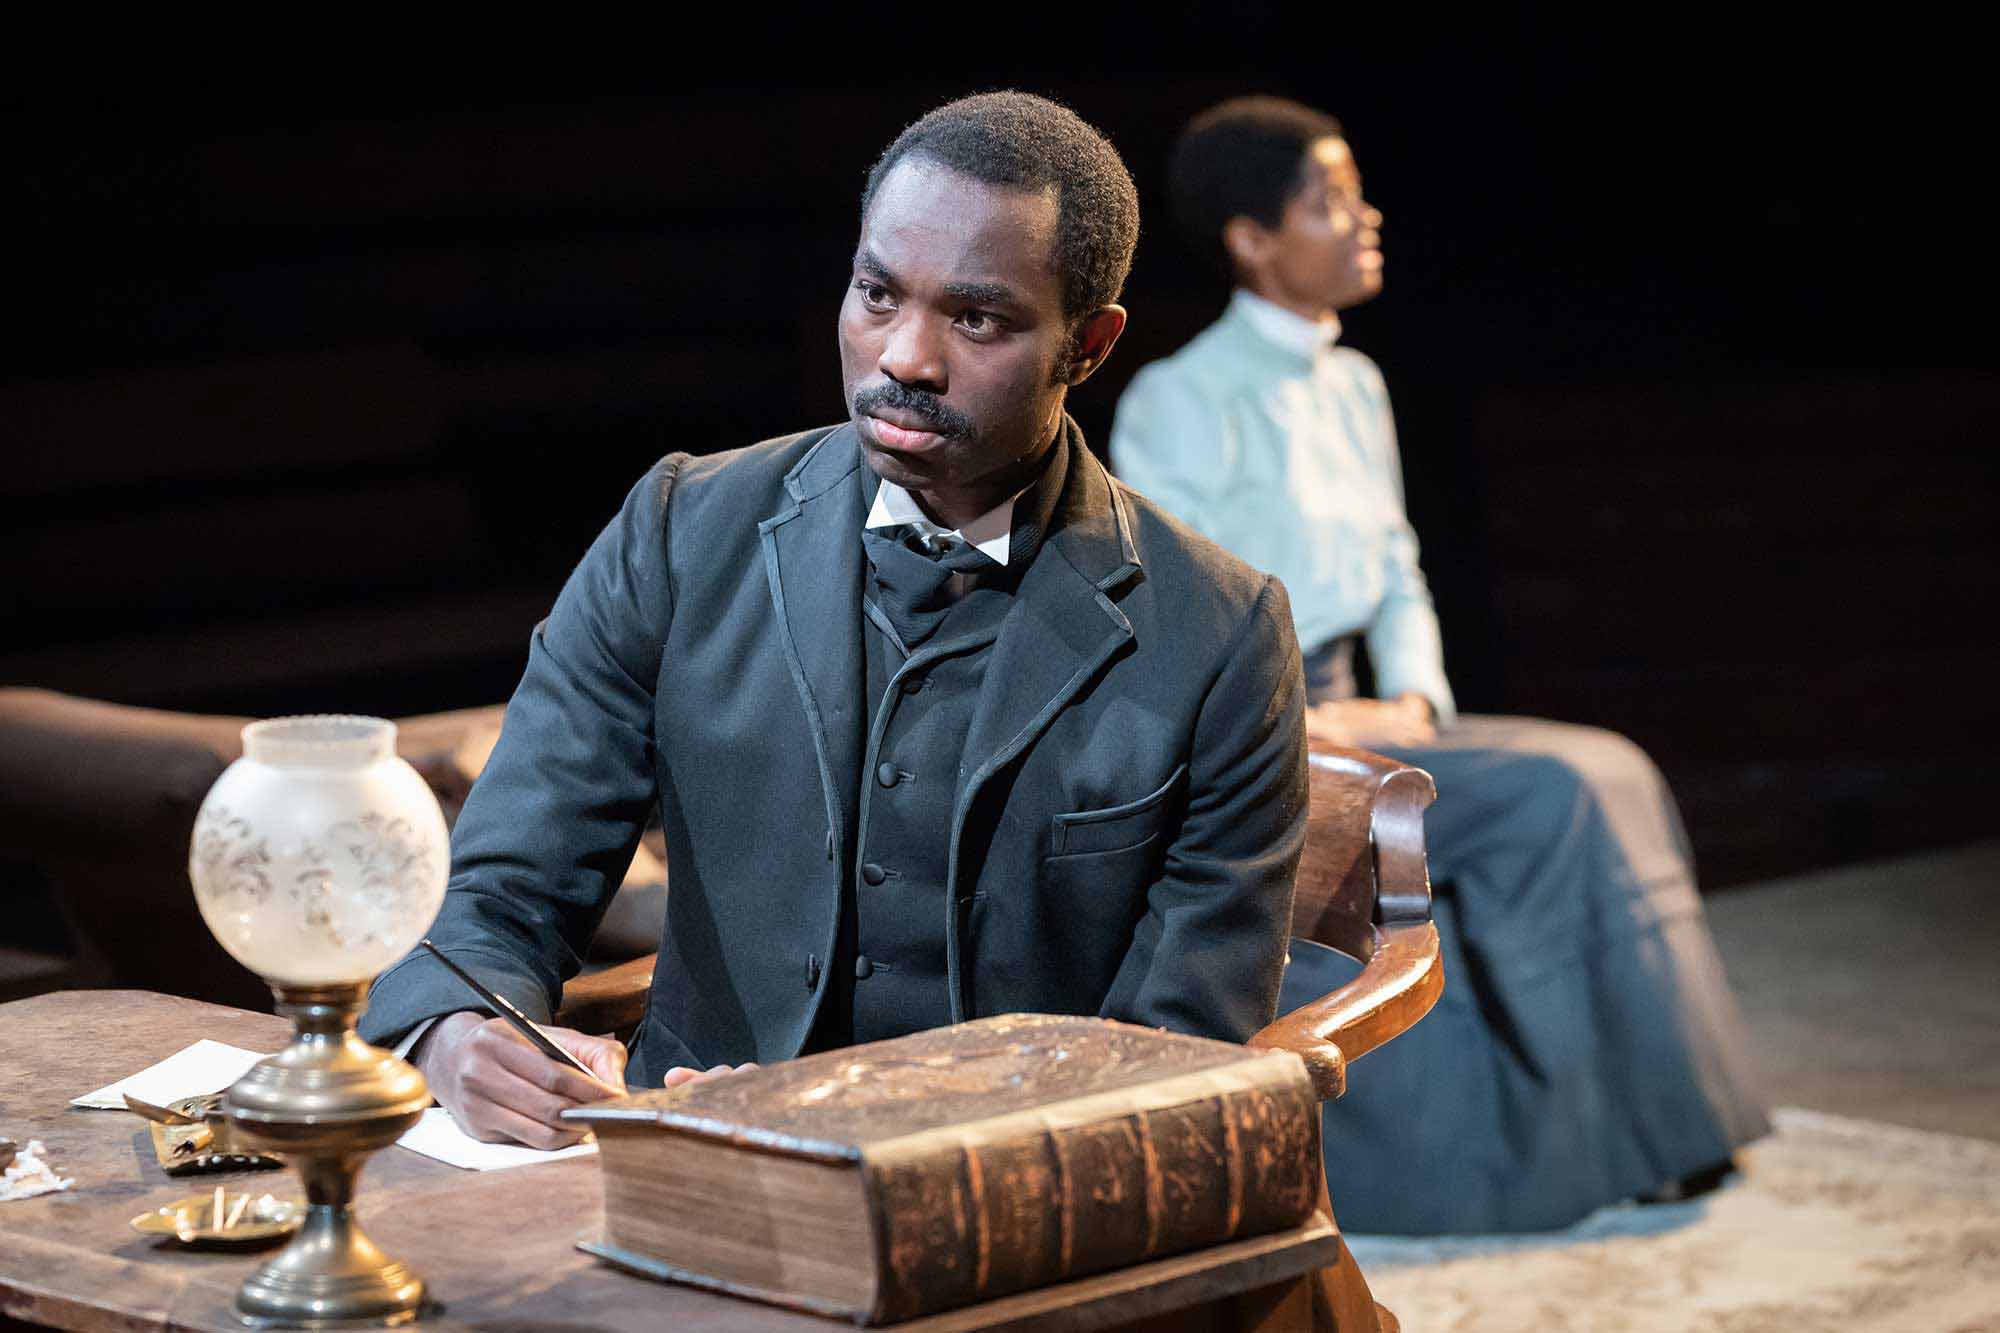 Paapa Essiedu and Letitia Wright in The Convert. Photography by Marc Brenner